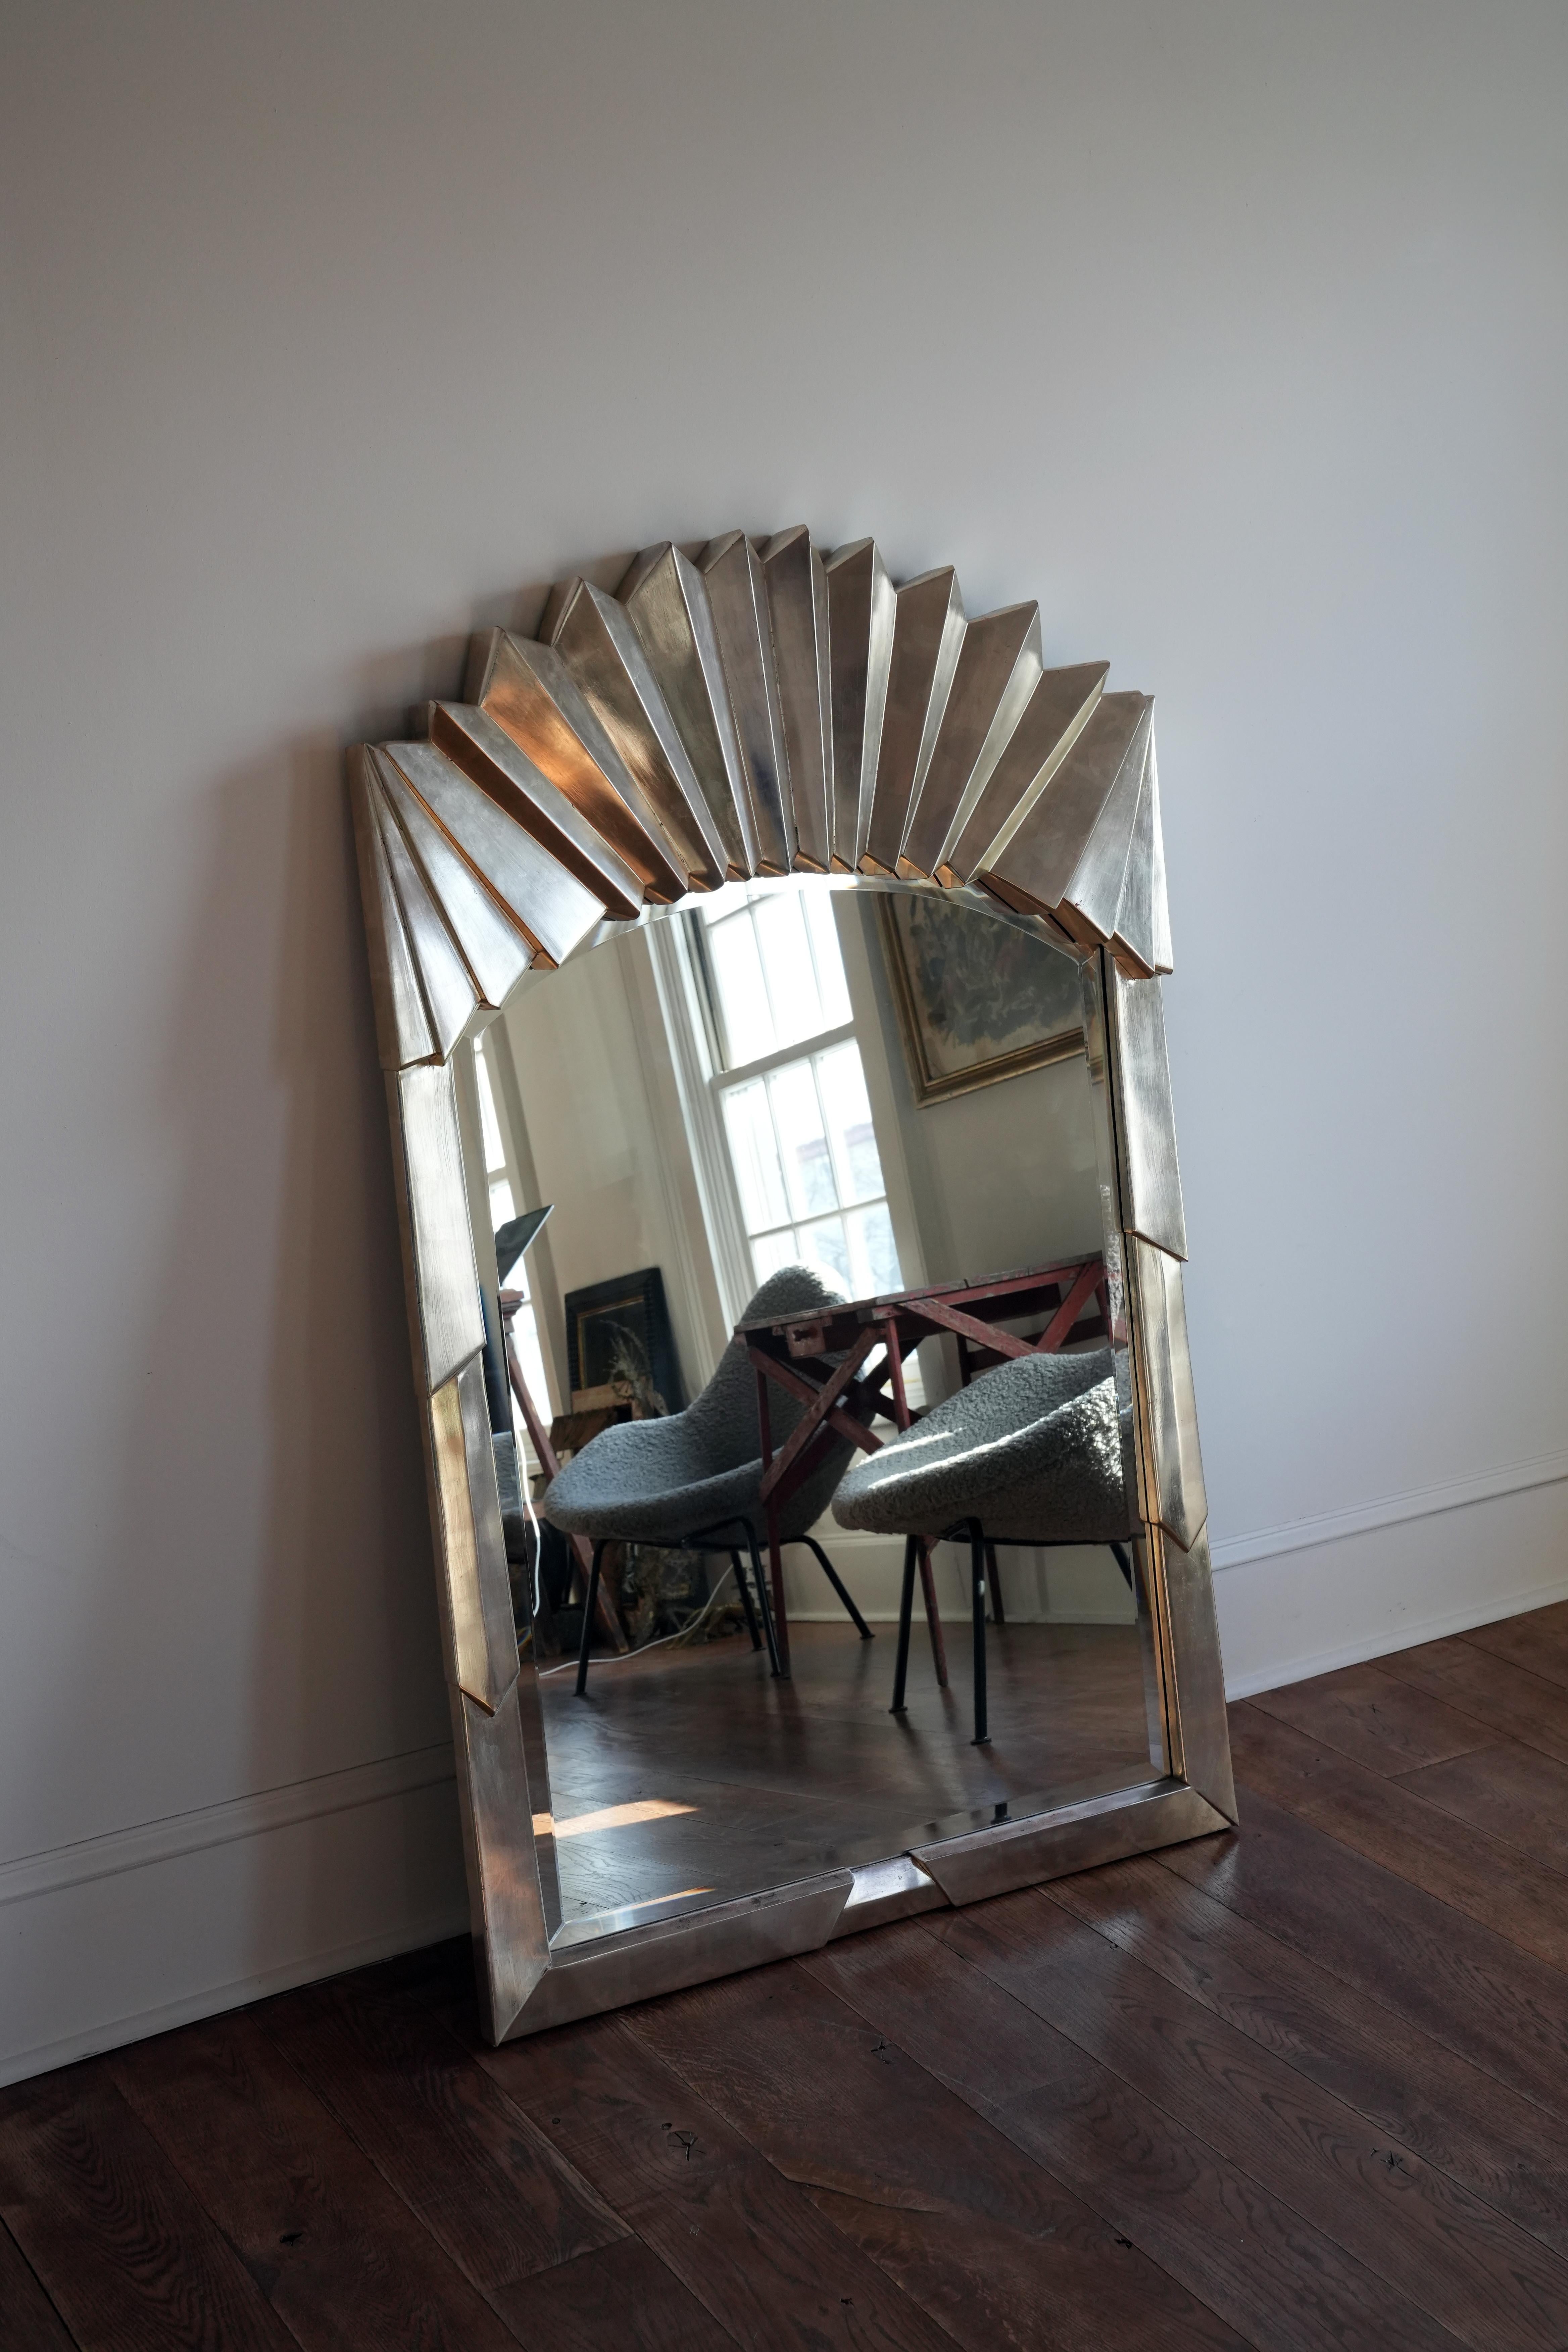 
Carved and silver gilt wood. Beveled mirror.